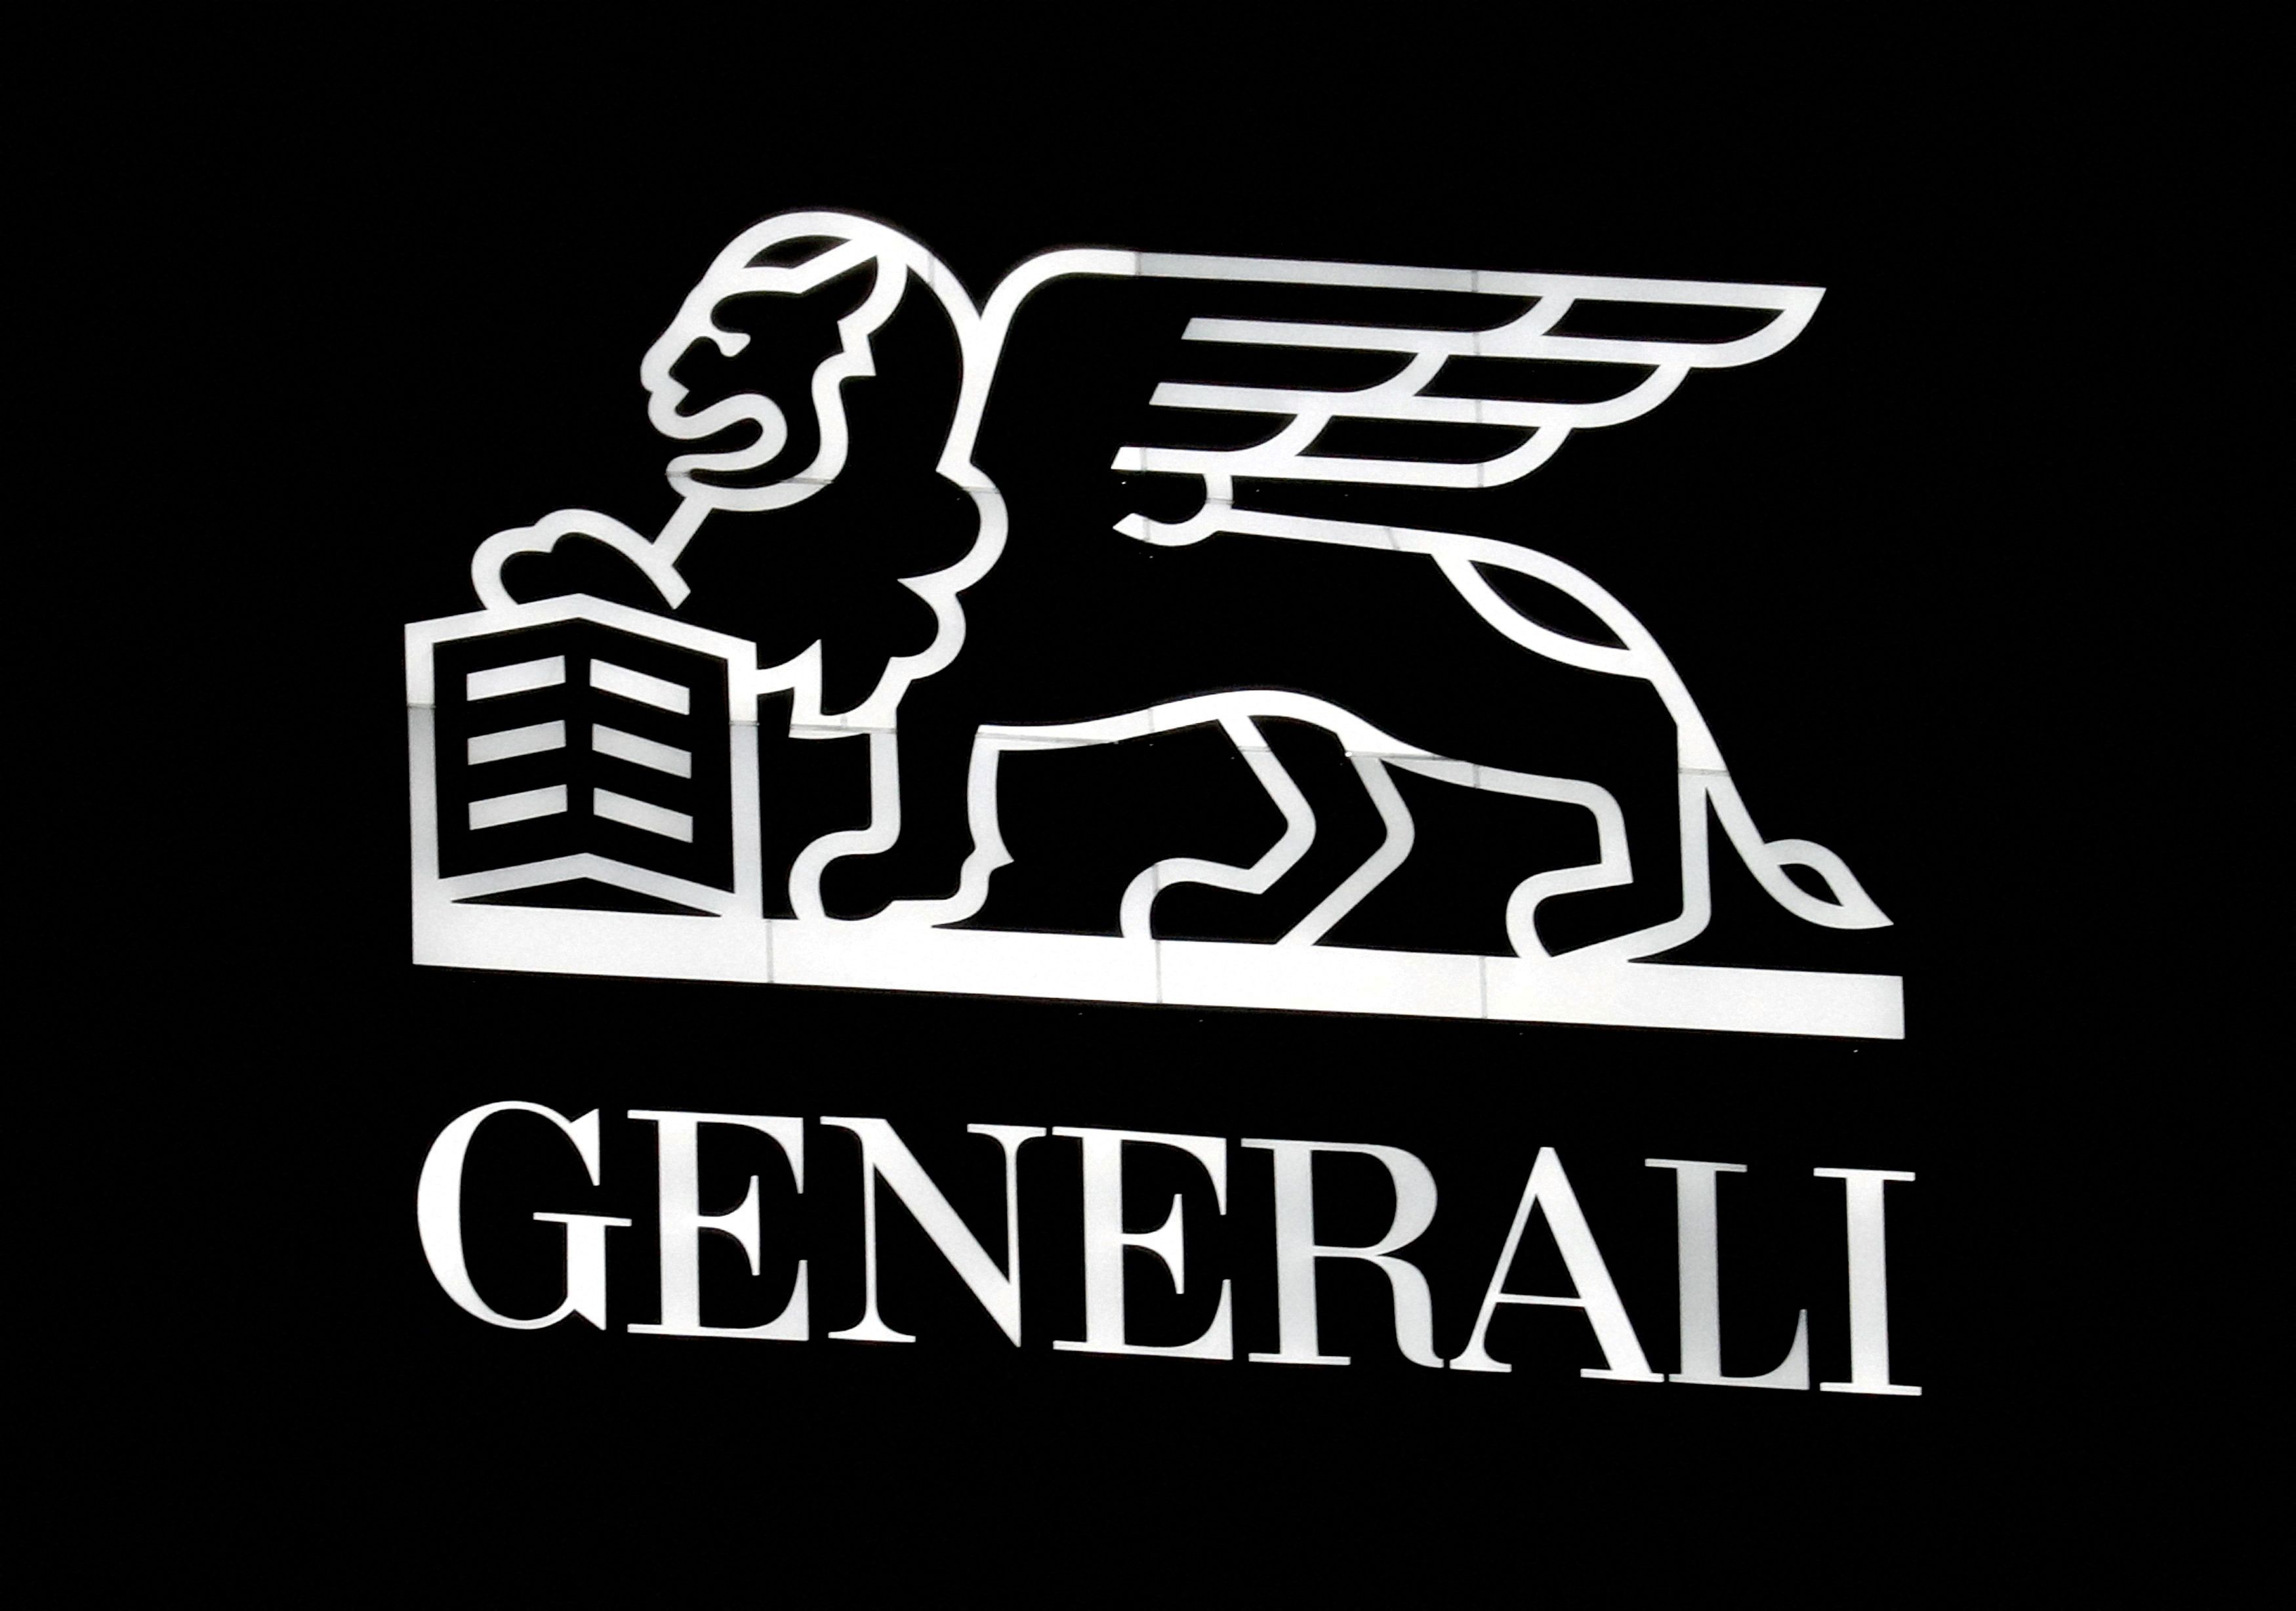 The Generali logo is seen on the company's building in Milan, Italy